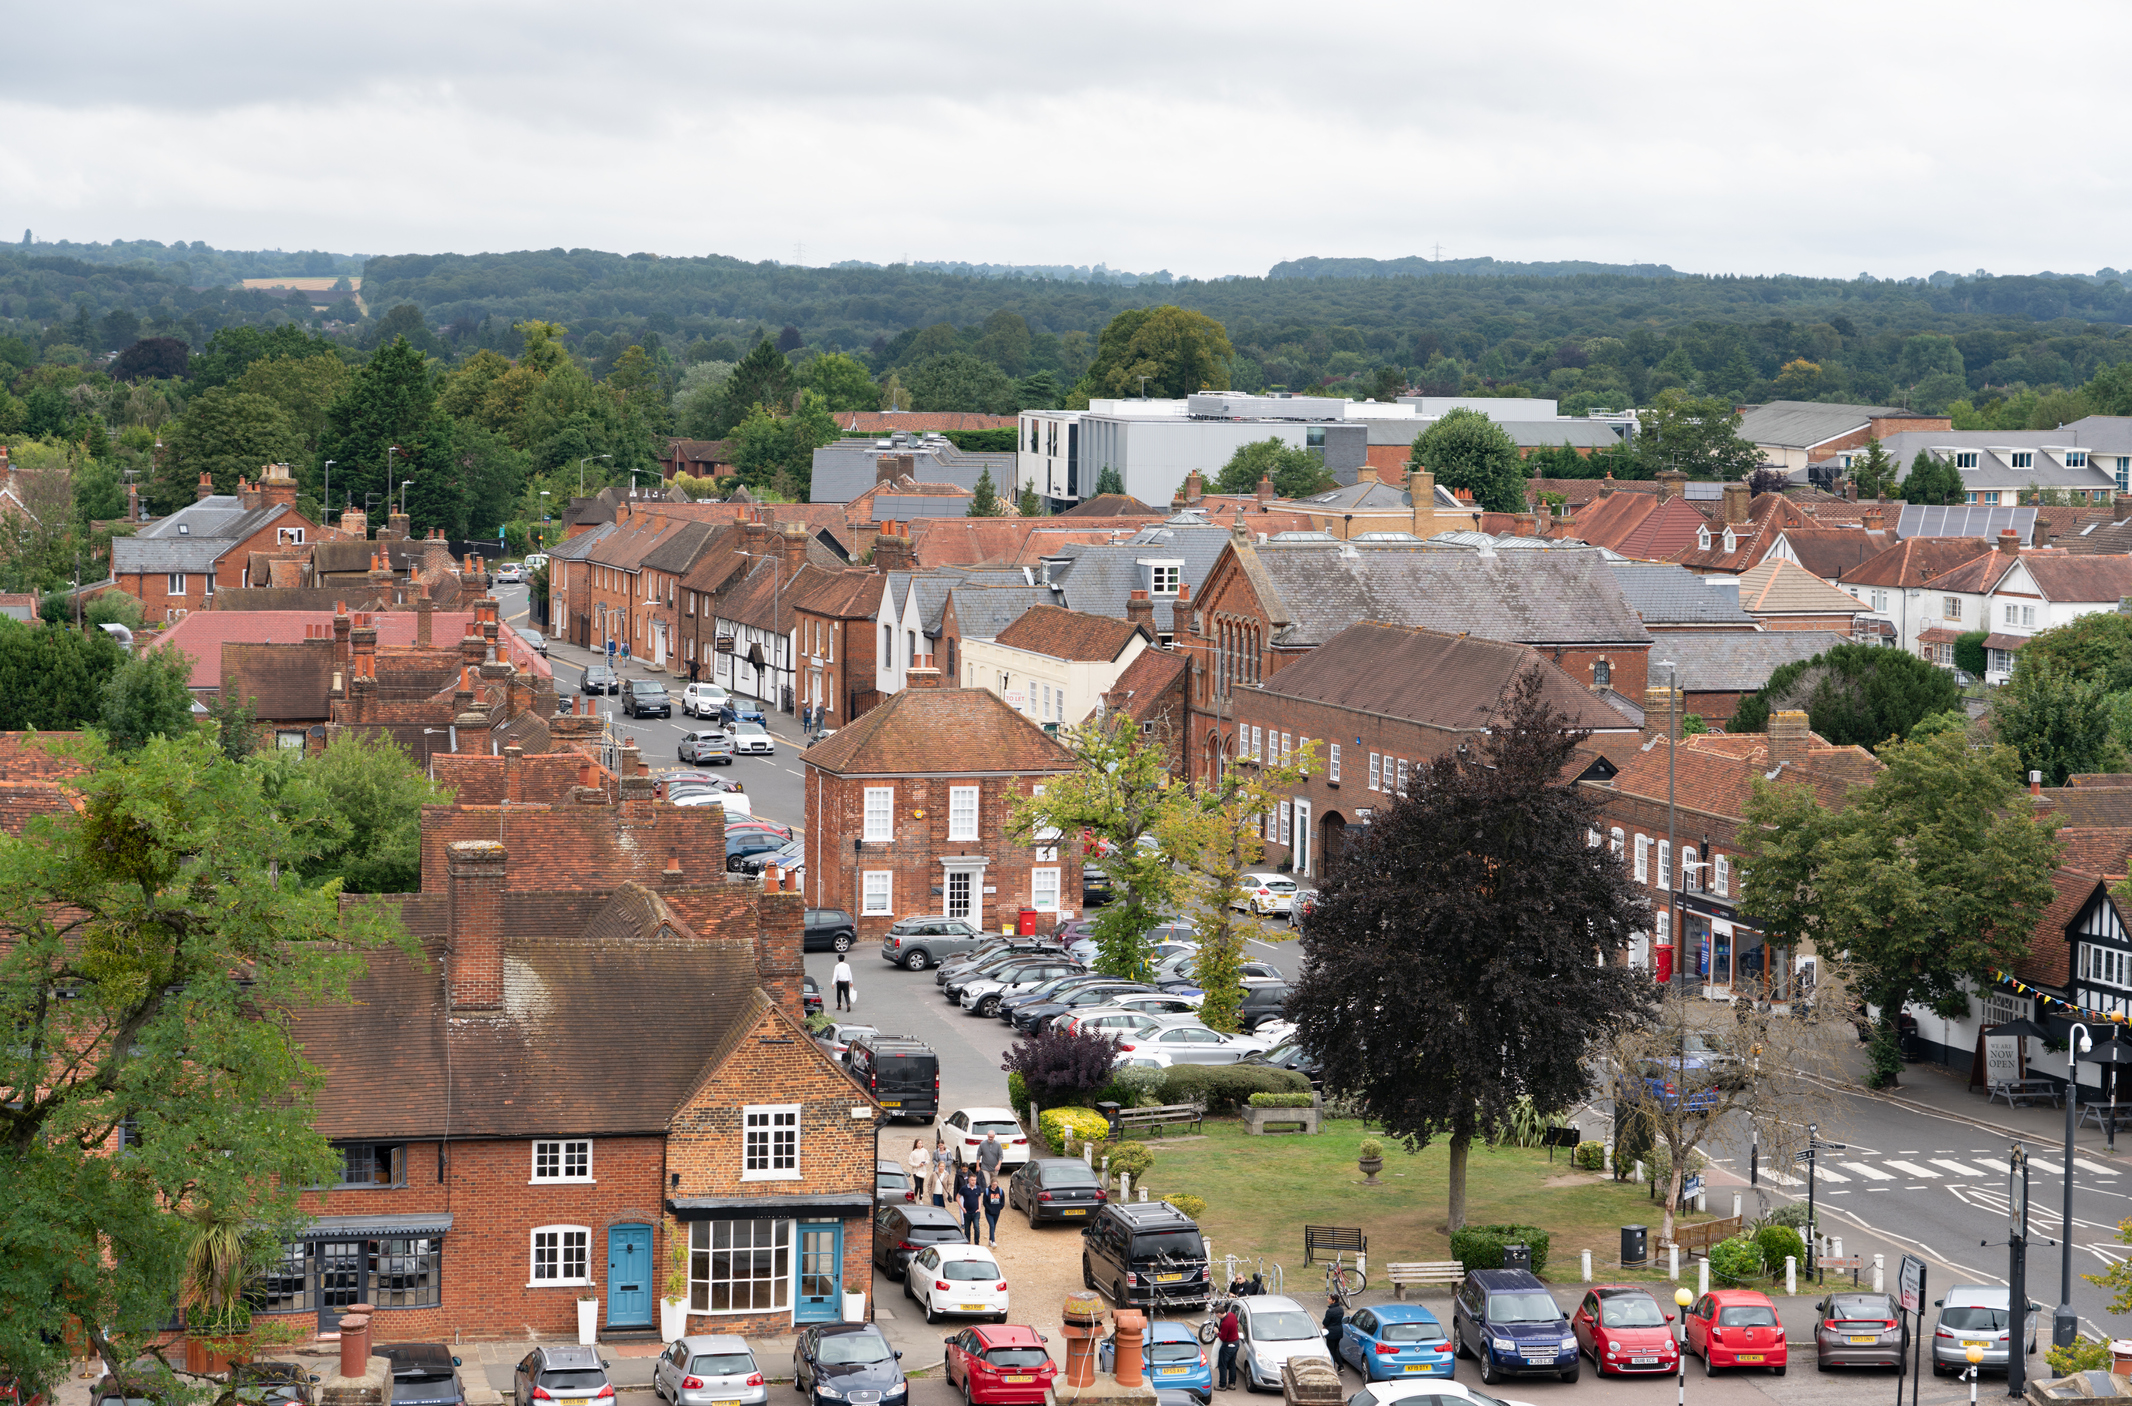 An elevated view of Beaconsfield Old Town in Buckinghamshire, UK.